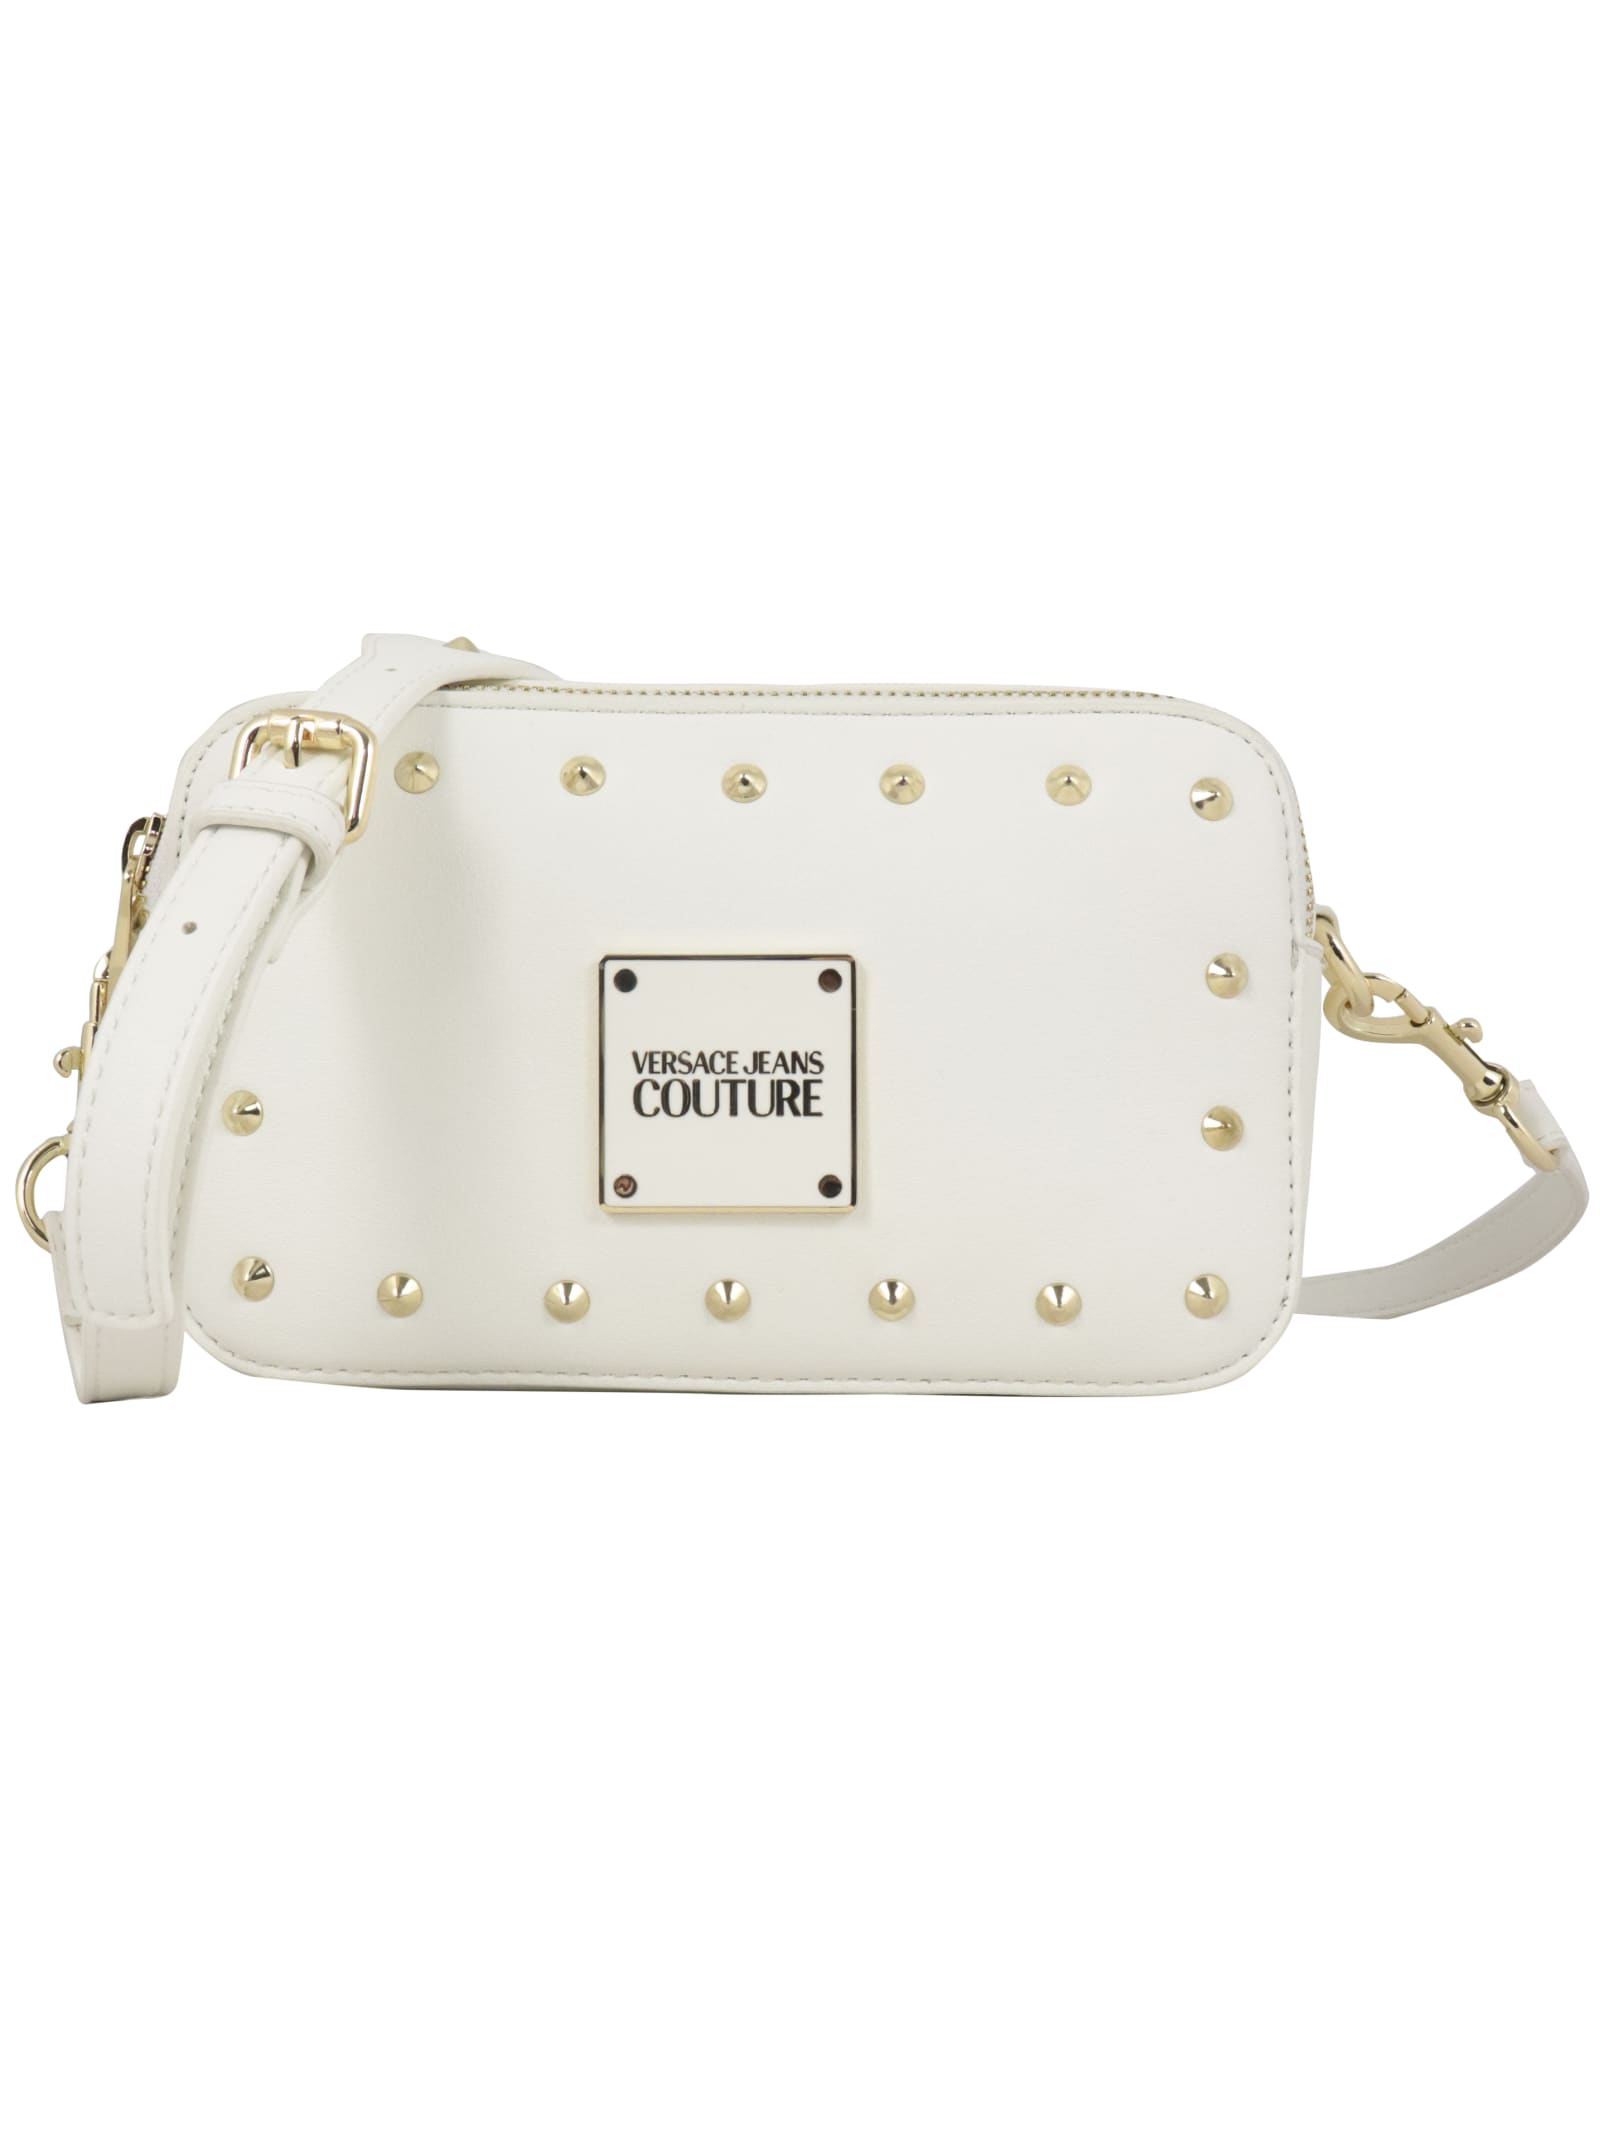 Versace Jeans Couture Borchie Tote In Optical White